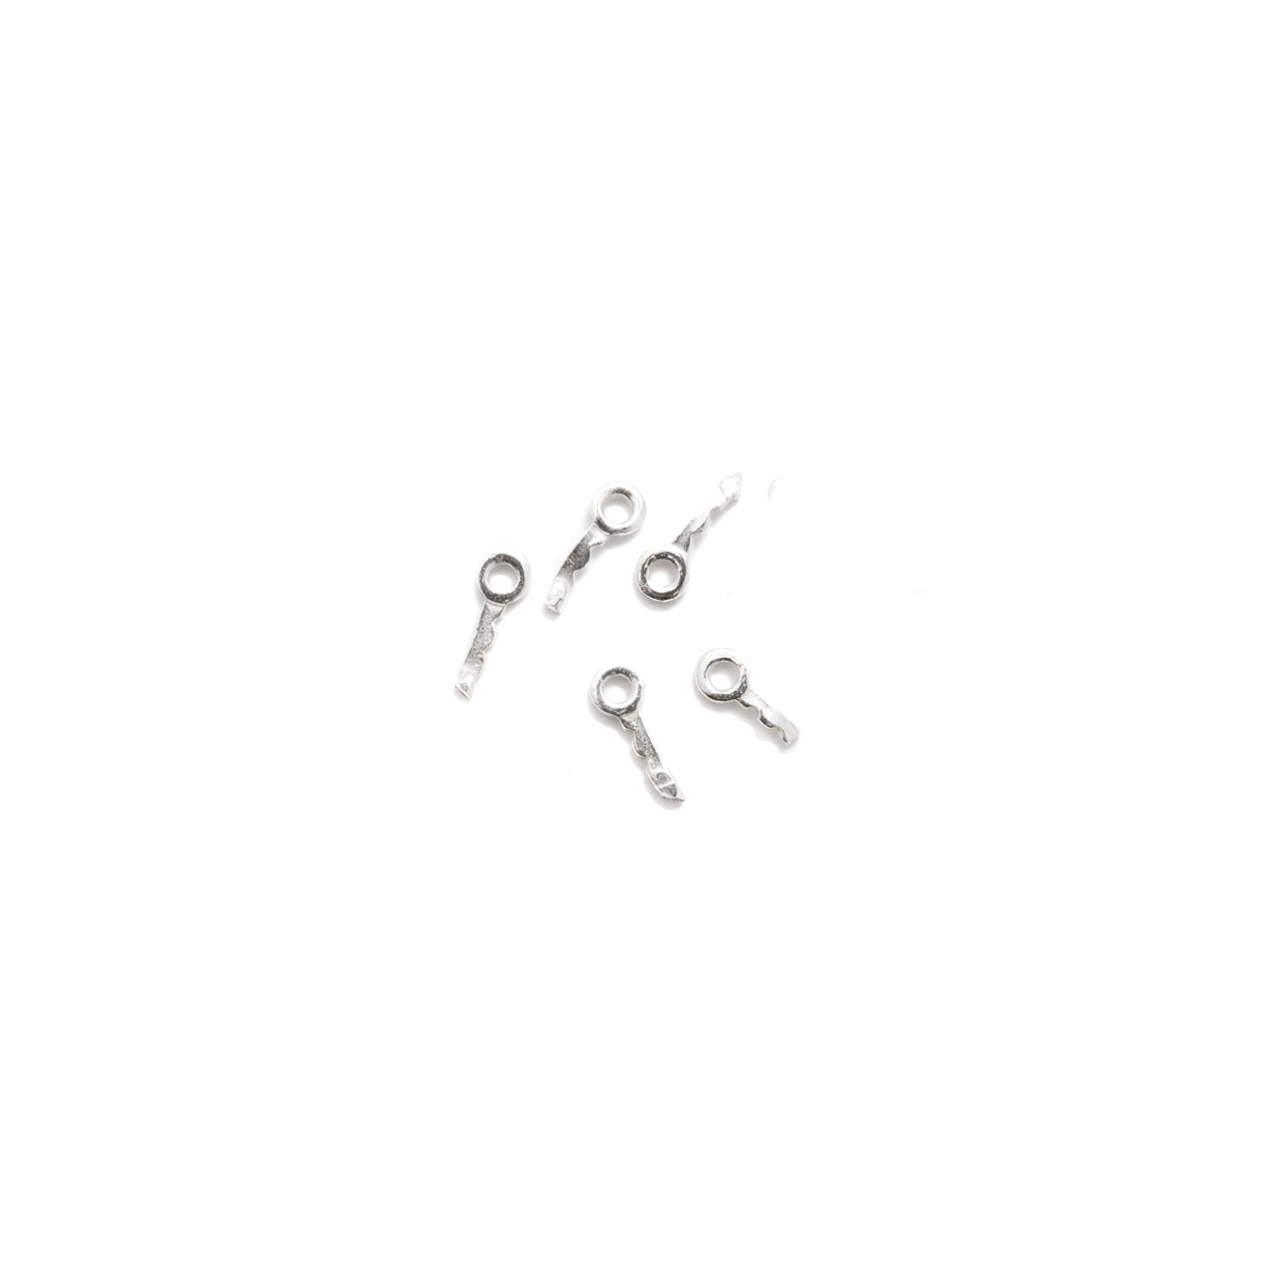 Embeddable Fine Silver Eyelet/Jump Ring - Economy - Small - 10 Pack